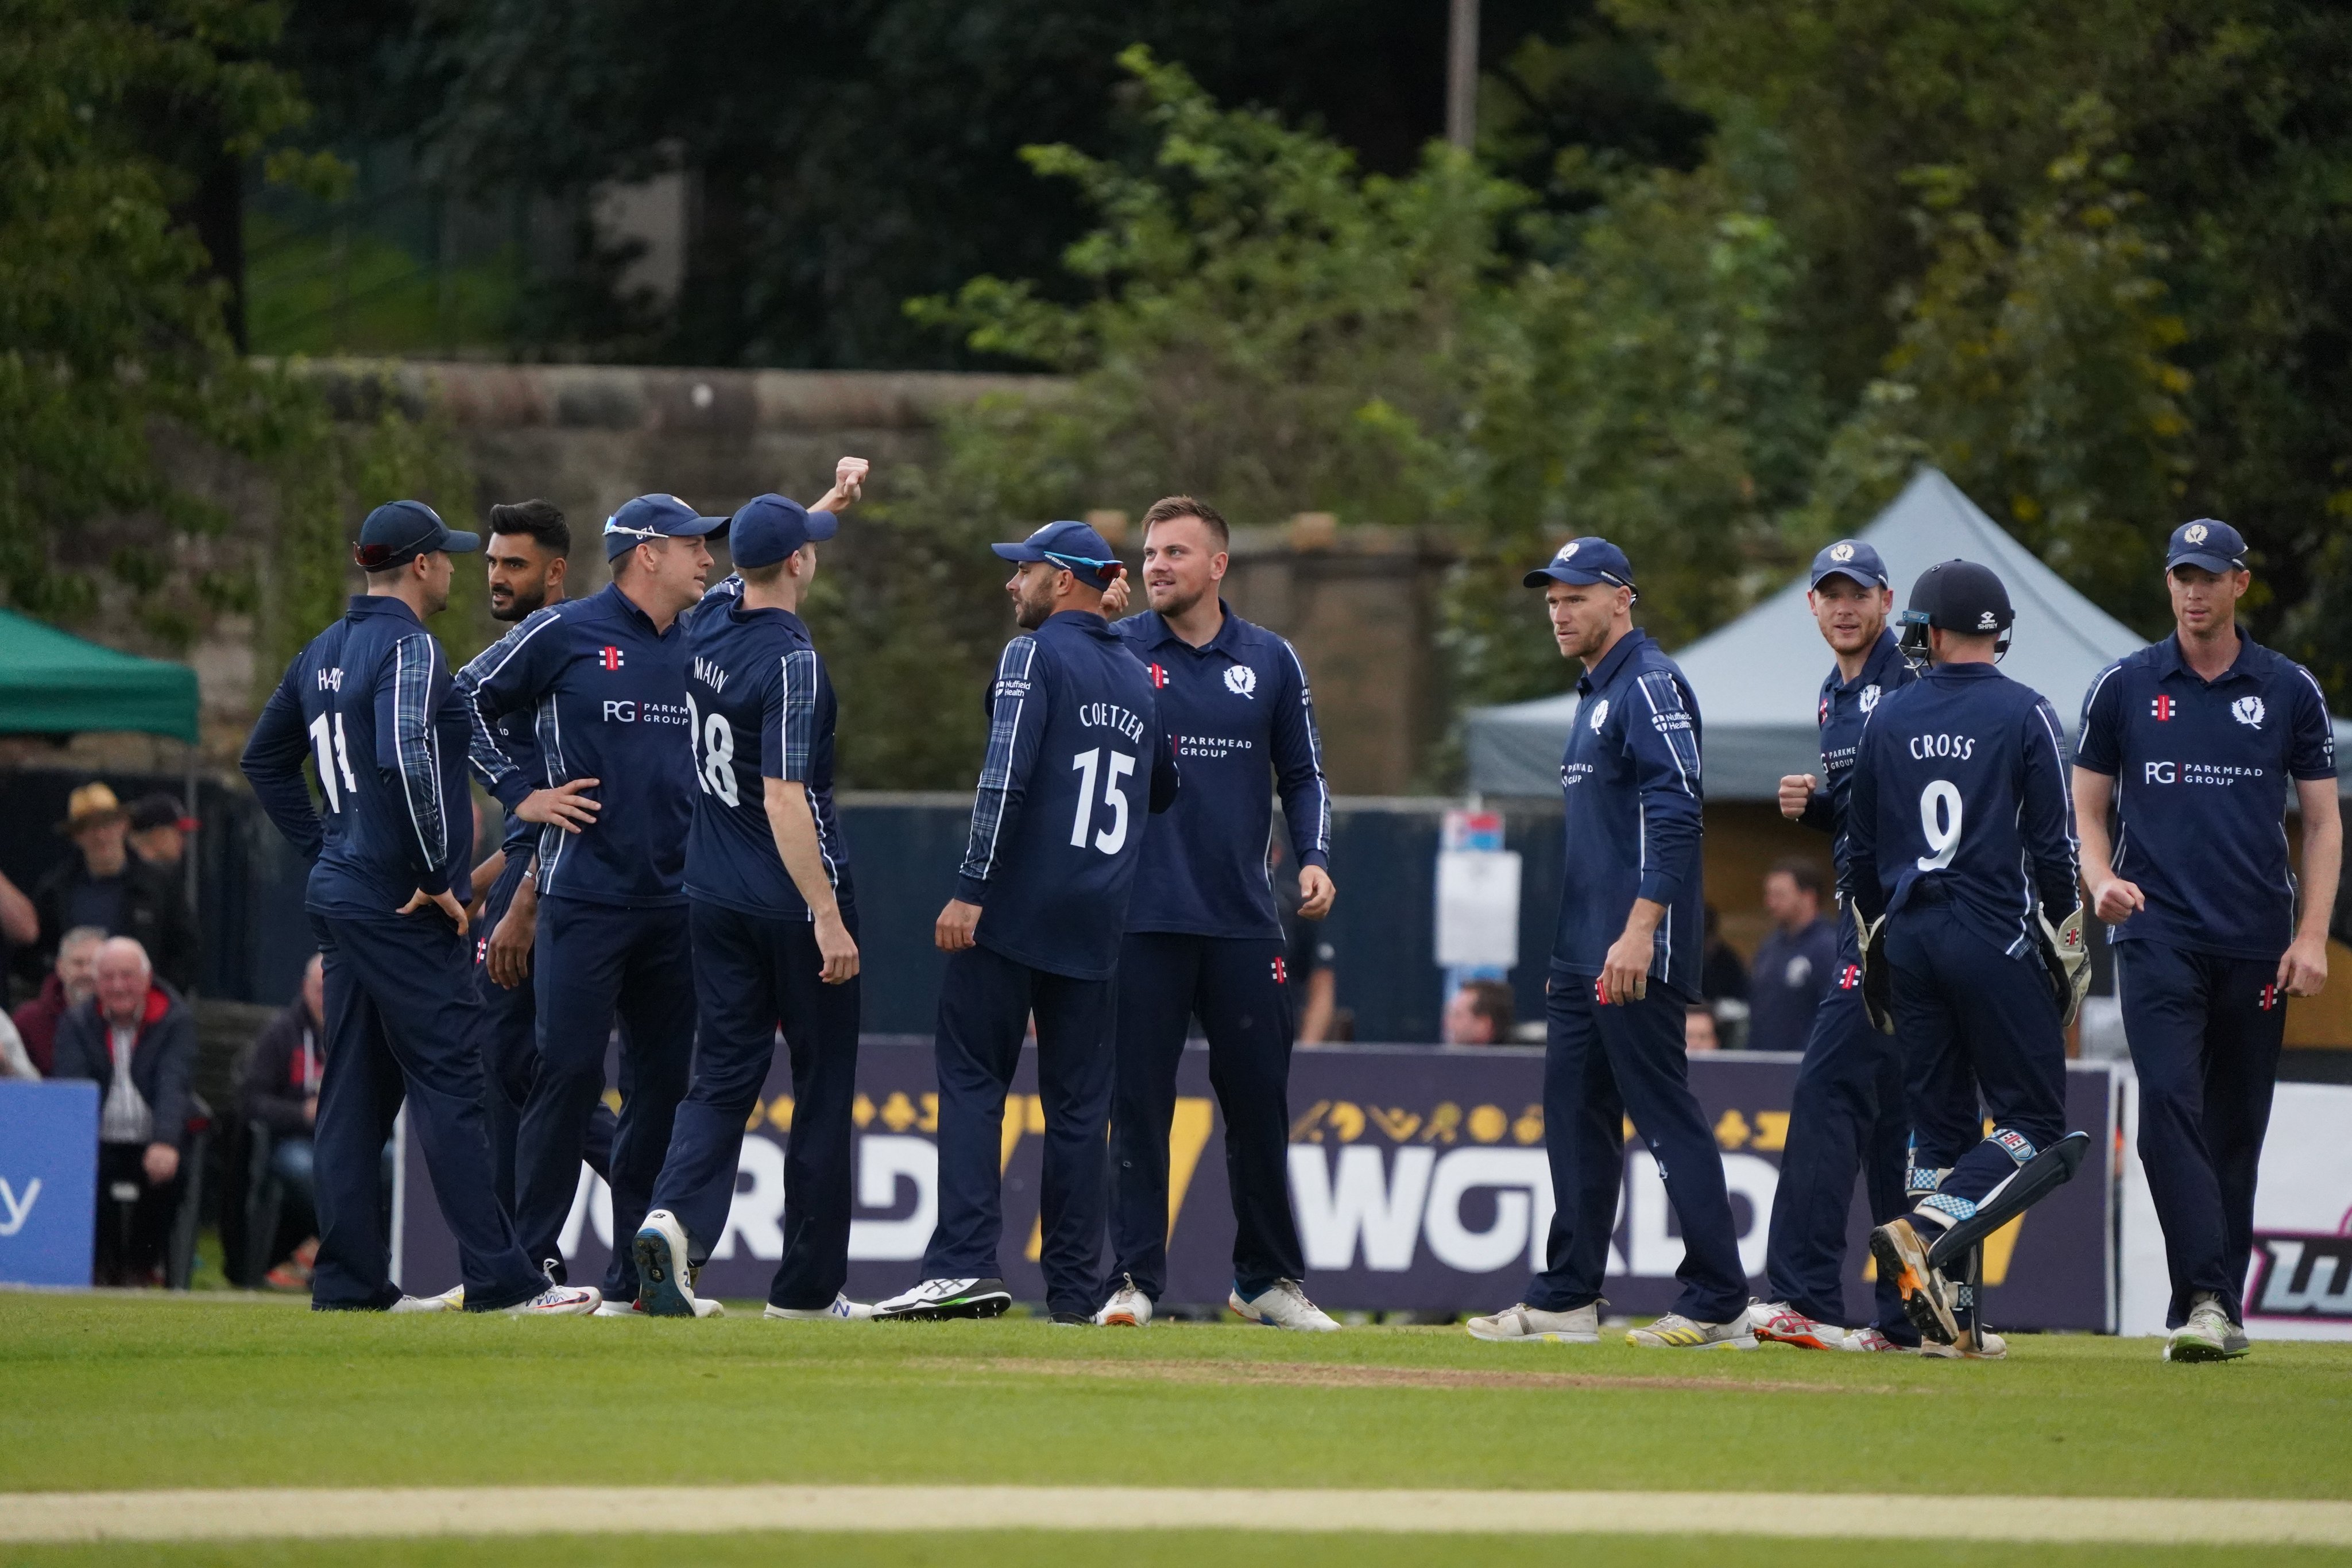 T20 World Cup 2021 | Scotland batting unit packed with match-winners, says Jonathan Trott.